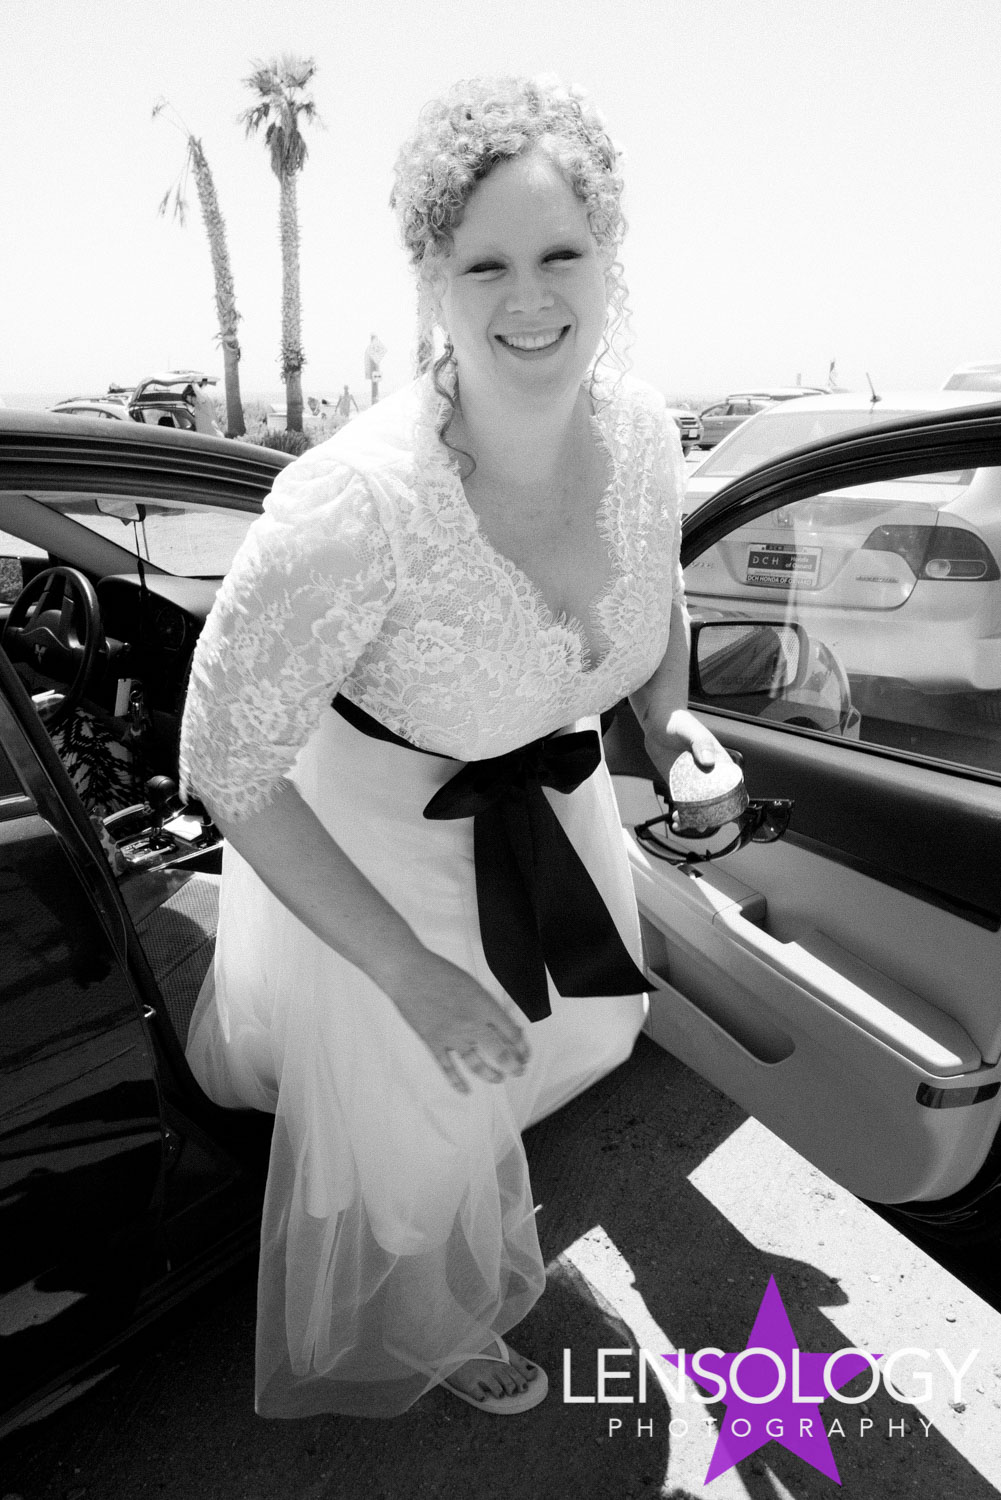 LENSOLOGY.NET -  Sarah and John beach wedding, Ventura, CA.
All images are copyright of Lensology.net
Email: info@lensology.net
www.lensology.net